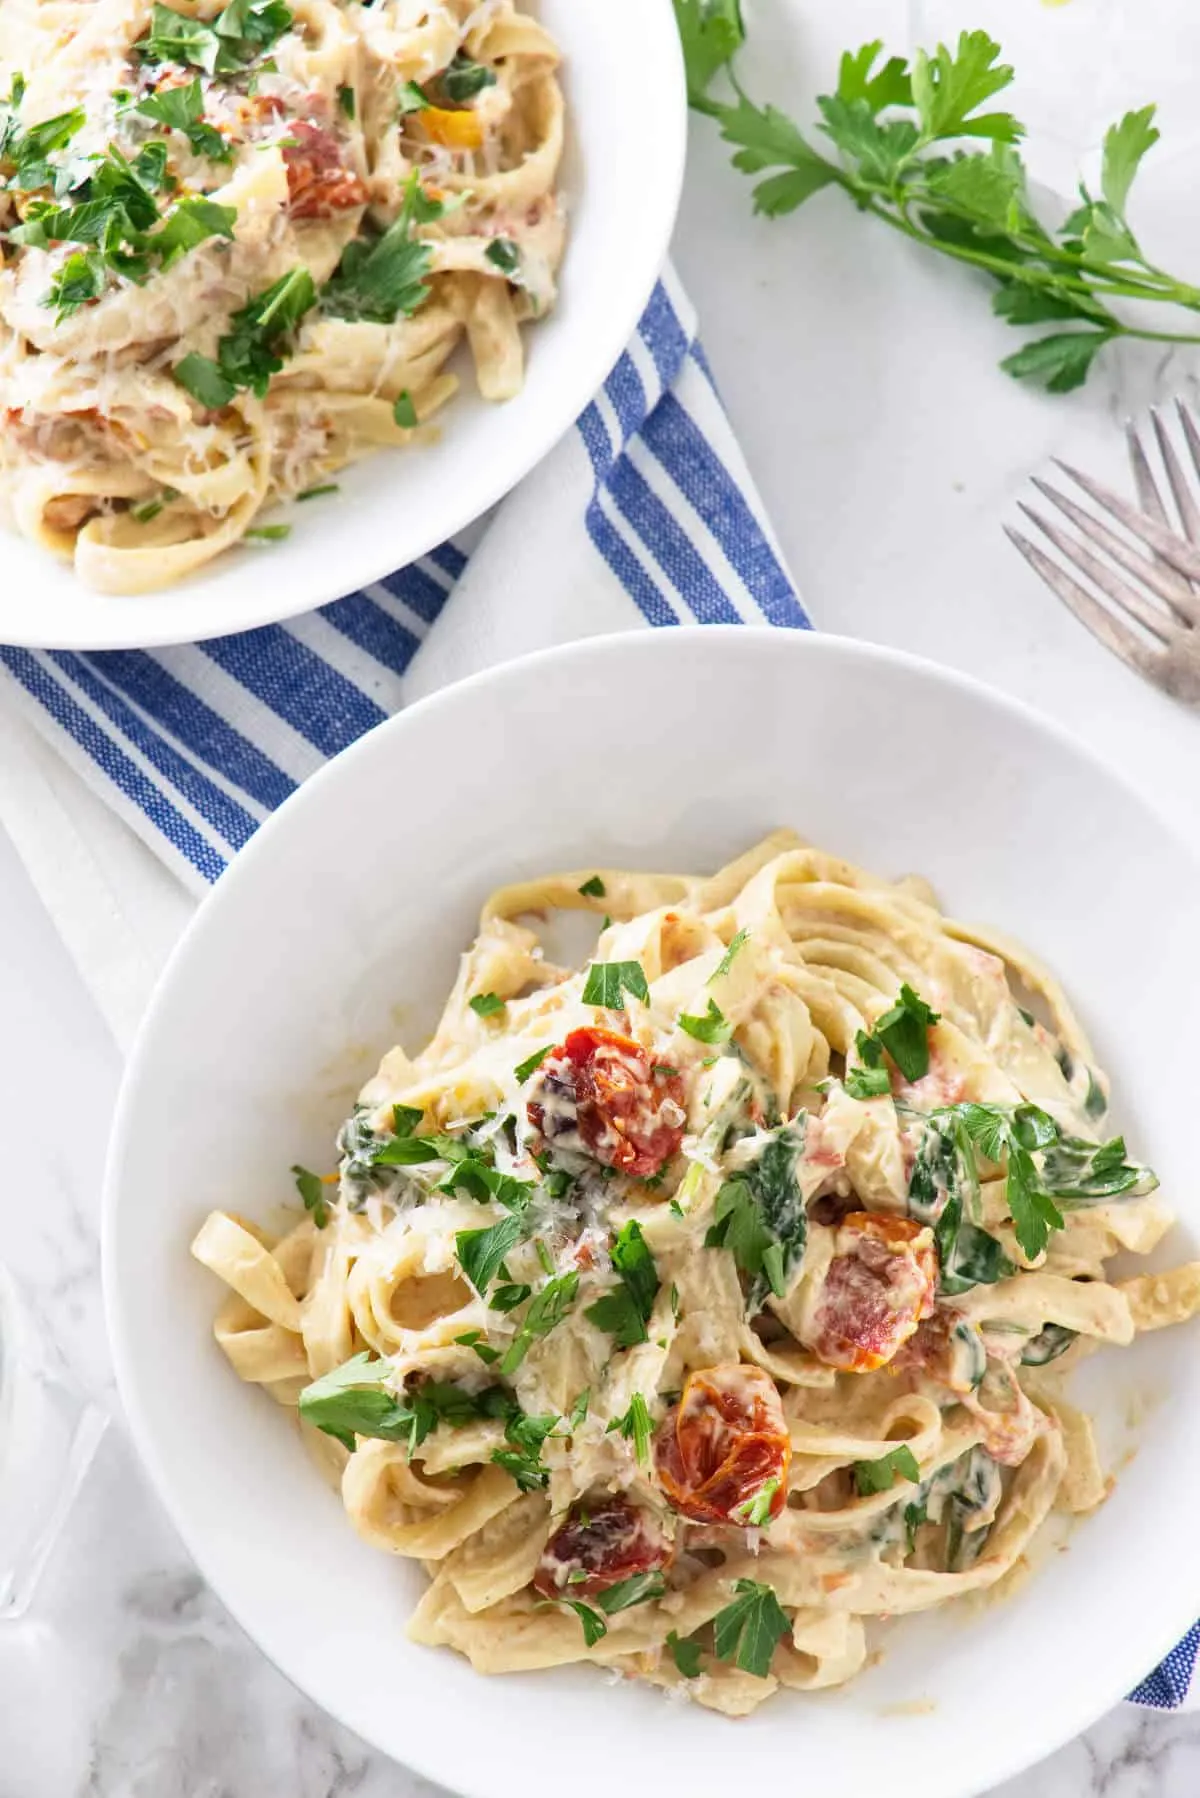 Spinach and Roasted Tomato Pasta with Cashew Cream Sauce - Savor the Best